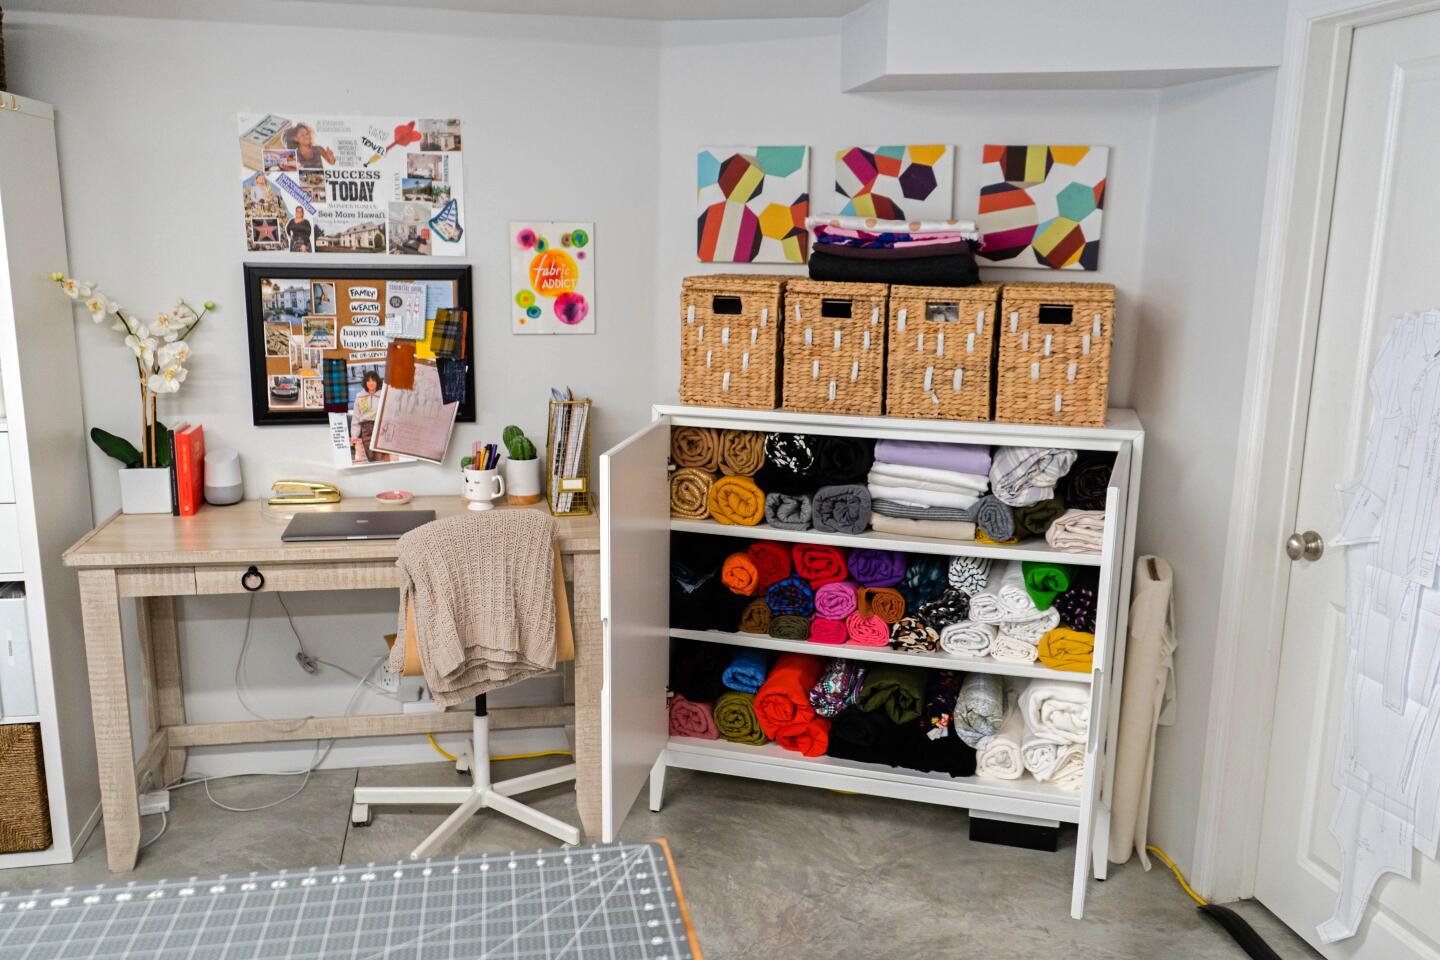 From her sunny home studio in Glendale, Mimi G is building an online sewing empire, one stitch at a time.